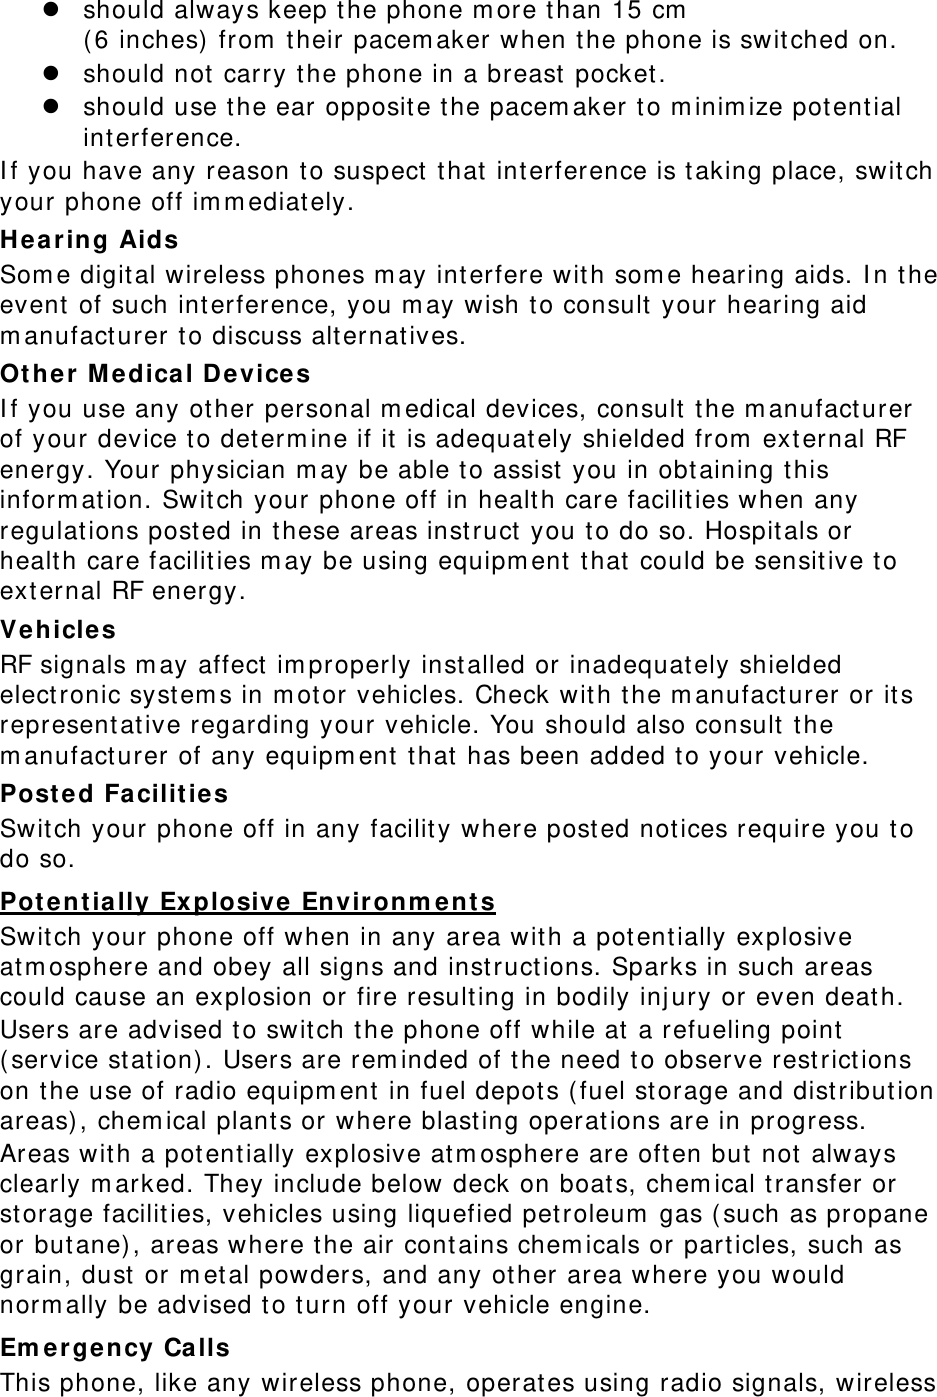  should always keep the phone more than 15 cm  (6 inches) from their pacemaker when the phone is switched on.  should not carry the phone in a breast pocket.  should use the ear opposite the pacemaker to minimize potential interference. If you have any reason to suspect that interference is taking place, switch your phone off immediately. Hearing Aids Some digital wireless phones may interfere with some hearing aids. In the event of such interference, you may wish to consult your hearing aid manufacturer to discuss alternatives. Other Medical Devices If you use any other personal medical devices, consult the manufacturer of your device to determine if it is adequately shielded from external RF energy. Your physician may be able to assist you in obtaining this information. Switch your phone off in health care facilities when any regulations posted in these areas instruct you to do so. Hospitals or health care facilities may be using equipment that could be sensitive to external RF energy. Vehicles RF signals may affect improperly installed or inadequately shielded electronic systems in motor vehicles. Check with the manufacturer or its representative regarding your vehicle. You should also consult the manufacturer of any equipment that has been added to your vehicle. Posted Facilities Switch your phone off in any facility where posted notices require you to do so. Potentially Explosive Environments Switch your phone off when in any area with a potentially explosive atmosphere and obey all signs and instructions. Sparks in such areas could cause an explosion or fire resulting in bodily injury or even death. Users are advised to switch the phone off while at a refueling point (service station). Users are reminded of the need to observe restrictions on the use of radio equipment in fuel depots (fuel storage and distribution areas), chemical plants or where blasting operations are in progress. Areas with a potentially explosive atmosphere are often but not always clearly marked. They include below deck on boats, chemical transfer or storage facilities, vehicles using liquefied petroleum gas (such as propane or butane), areas where the air contains chemicals or particles, such as grain, dust or metal powders, and any other area where you would normally be advised to turn off your vehicle engine. Emergency Calls This phone, like any wireless phone, operates using radio signals, wireless 